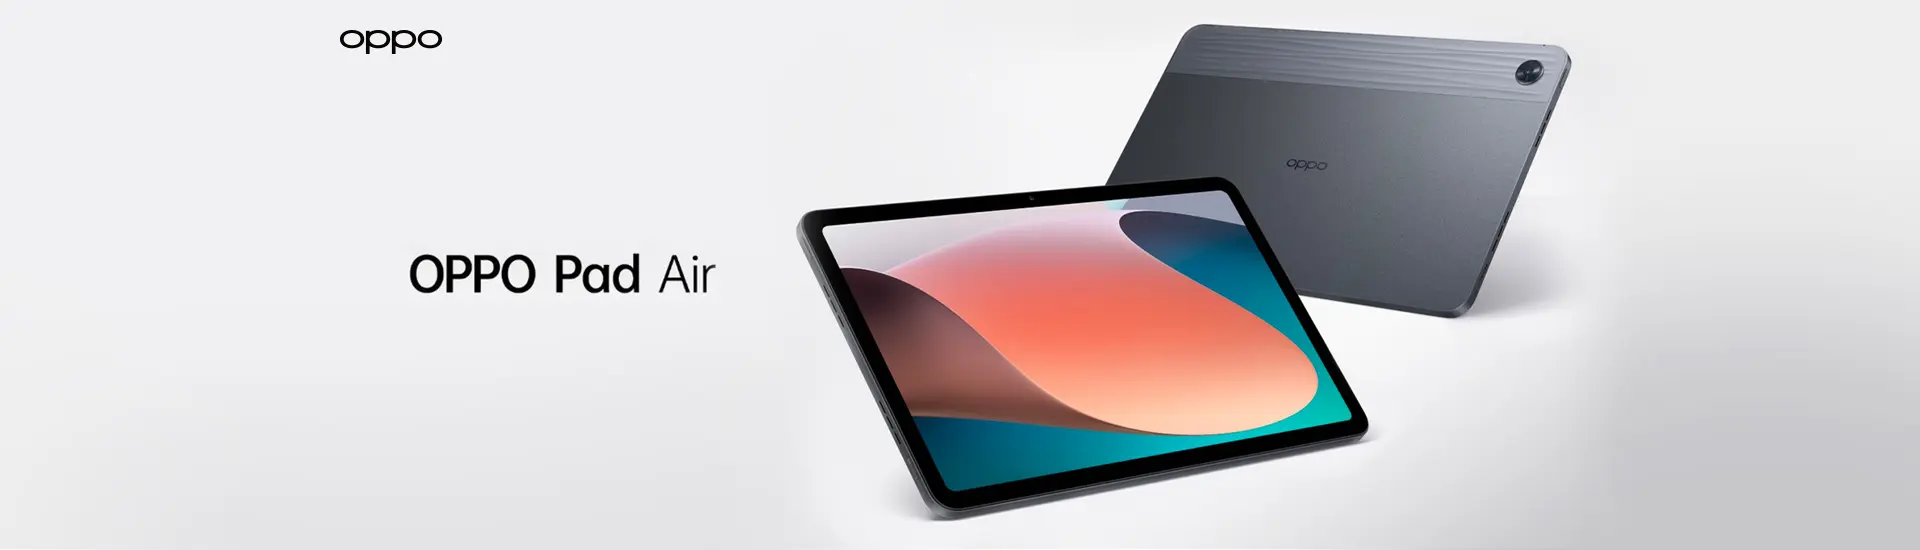 OPPO Pad Air (Wi-Fi Tablet)